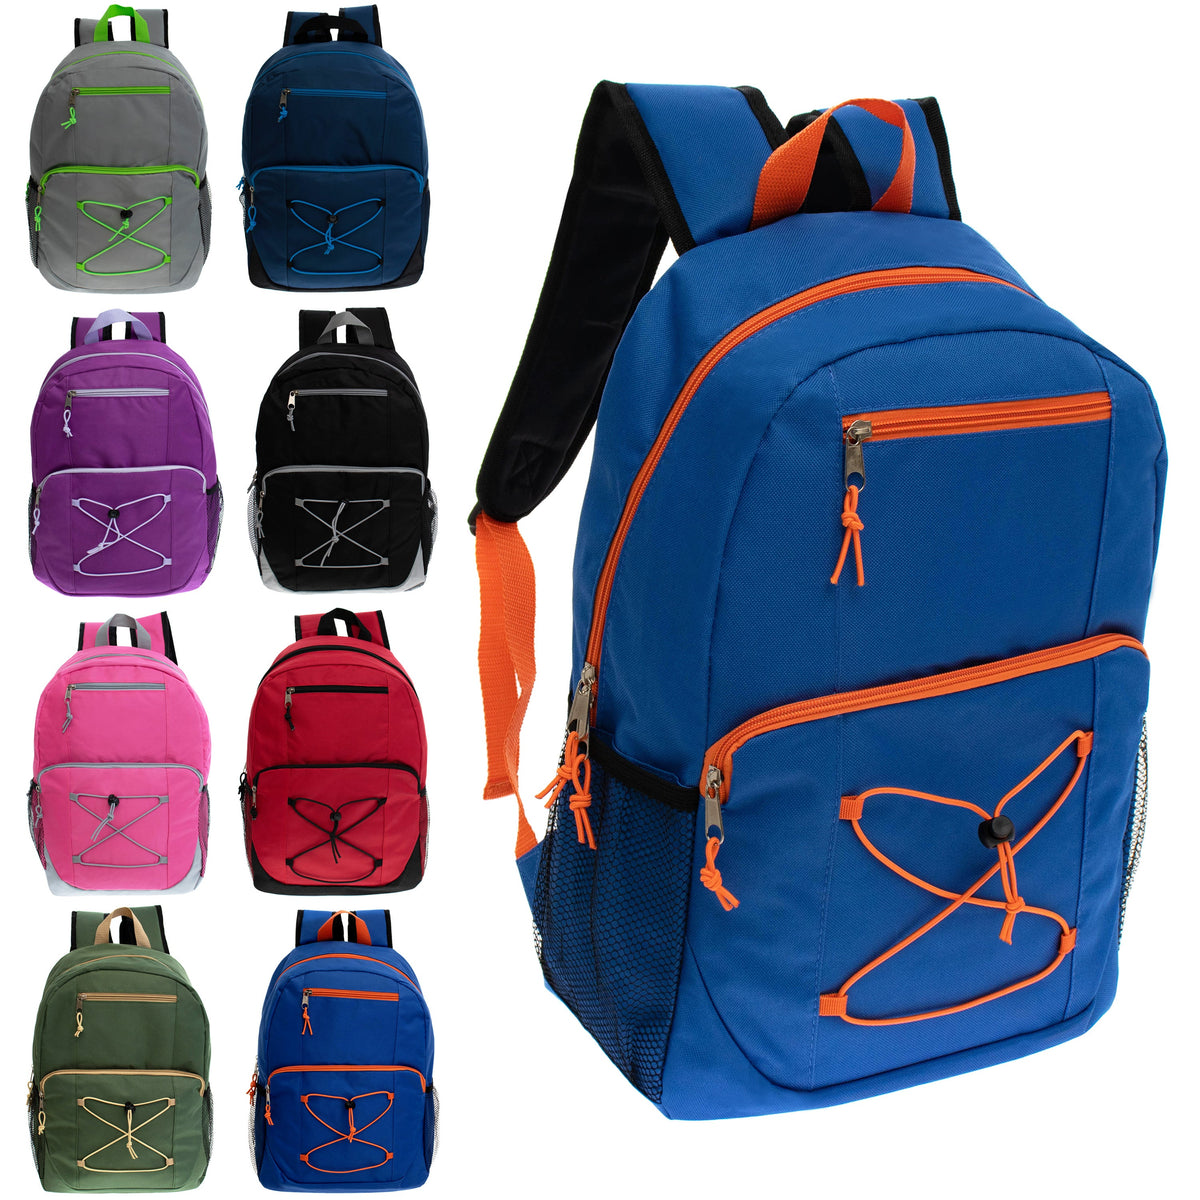 Buy 17" Bungee Wholesale Backpack in 8Assorted Colors - Bulk Case of 24